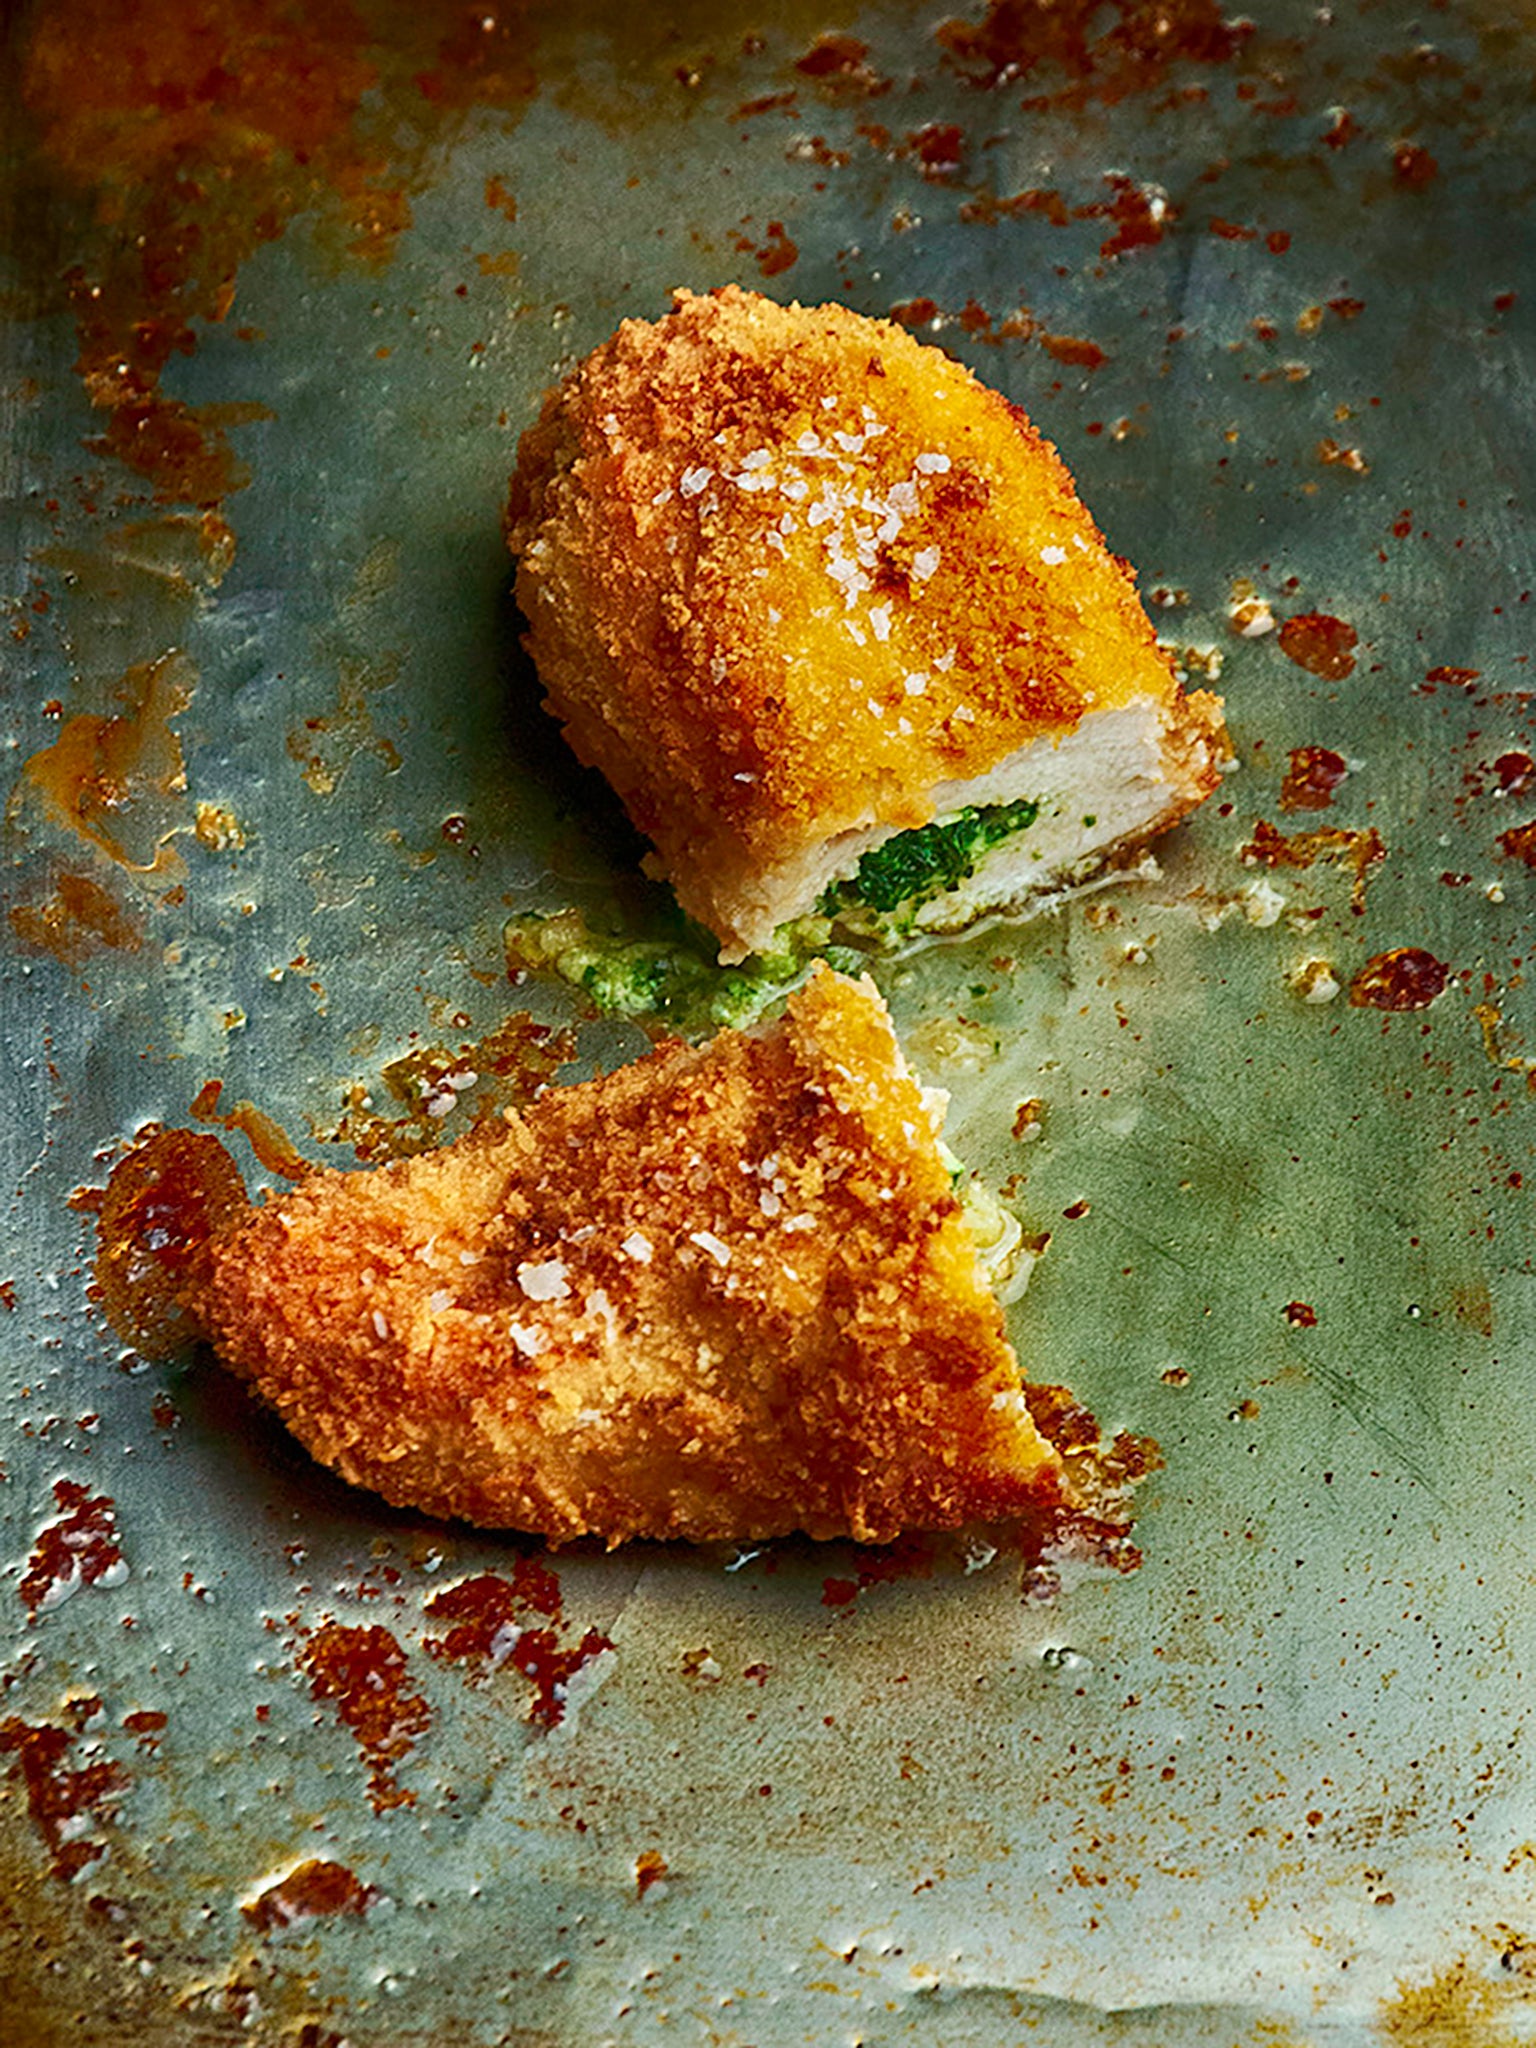 These melt-in-the-mouth kievs are very simple to make